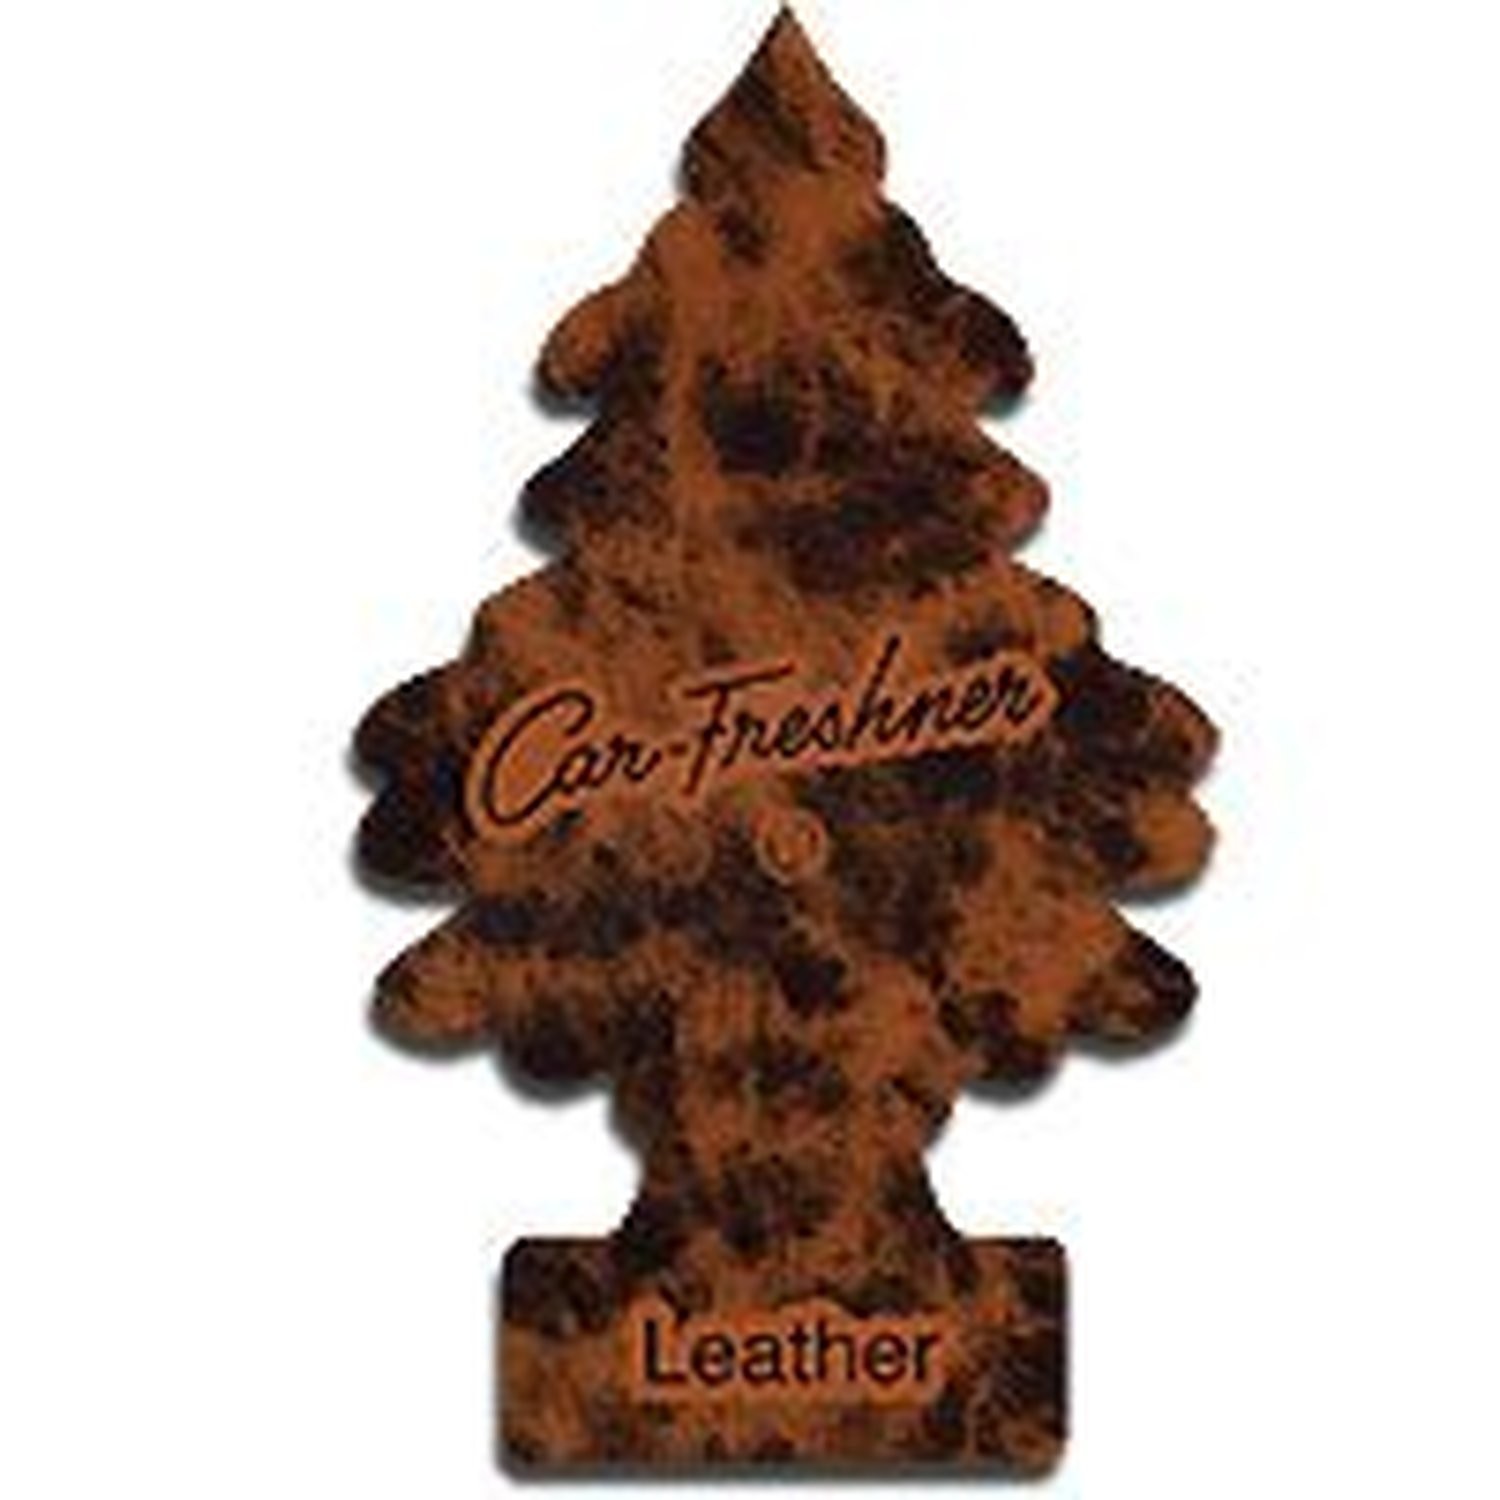 AoE Performance Magic Tree Car Air Freshener Duo Gift Pack Leather And New Car Scent